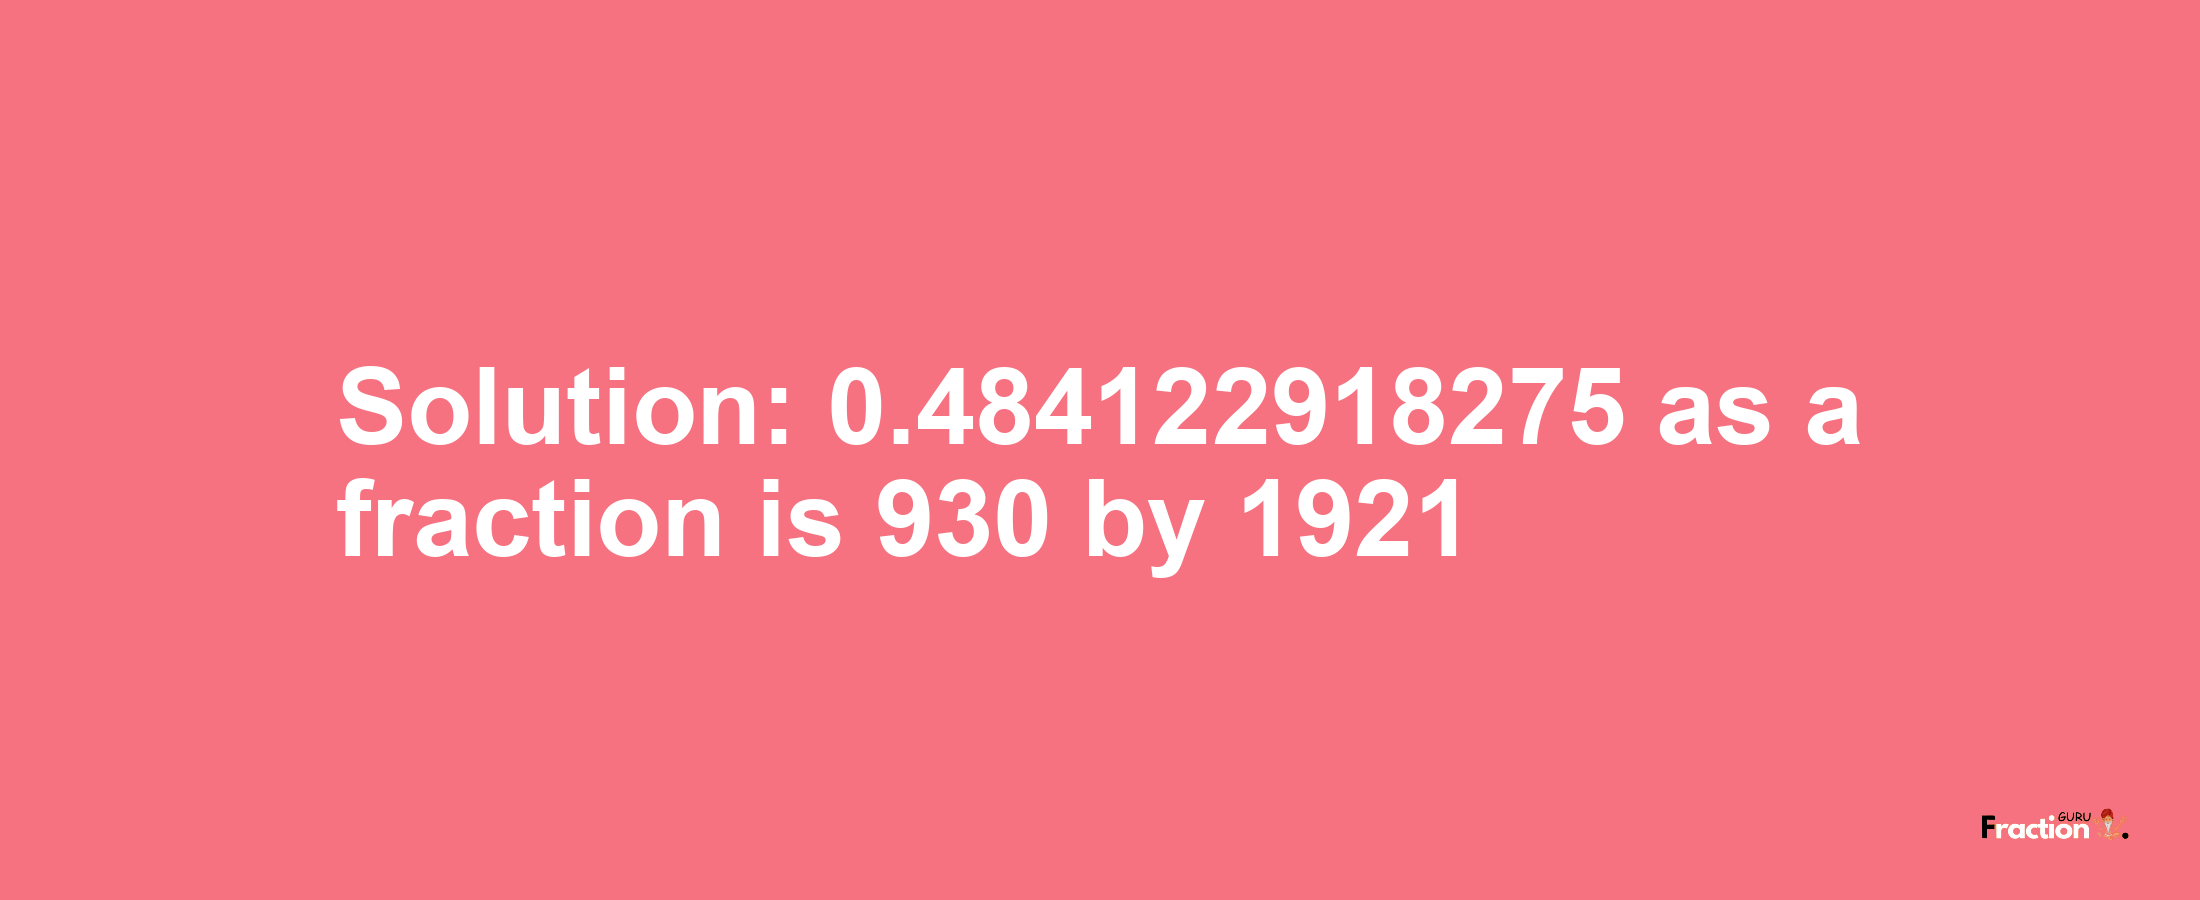 Solution:0.484122918275 as a fraction is 930/1921